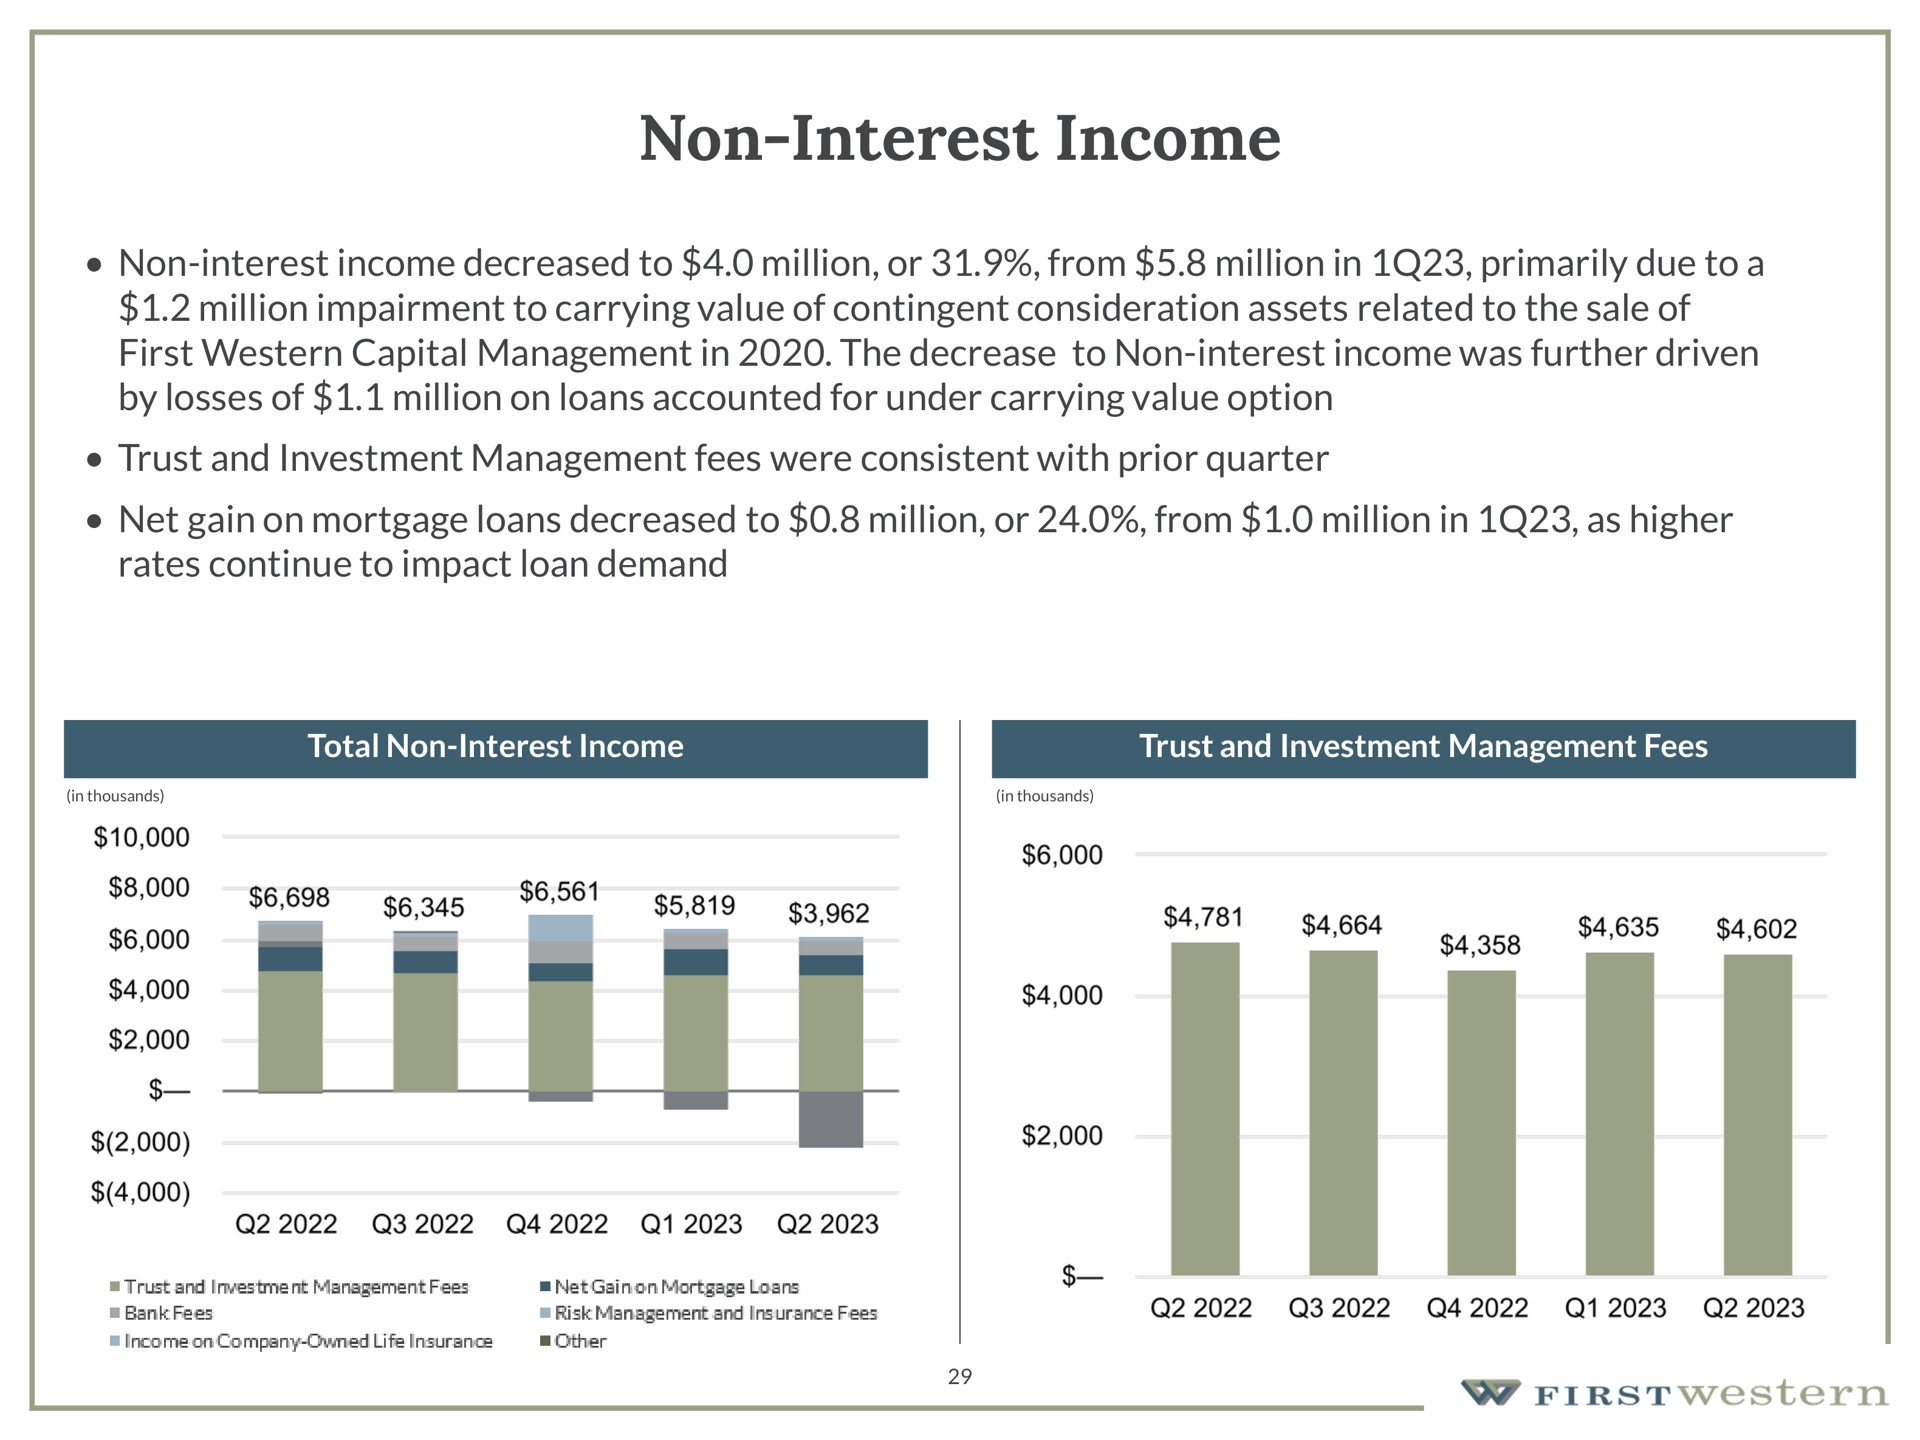 non interest income non interest income decreased to million or from million in primarily due to a million impairment to carrying value of contingent consideration assets related to the sale of first western capital management in the decrease to non interest income was further driven by losses of million on loans accounted for under carrying value option trust and investment management fees were consistent with prior quarter net gain on mortgage loans decreased to million or from million in as higher rates continue to impact loan demand | First Western Financial